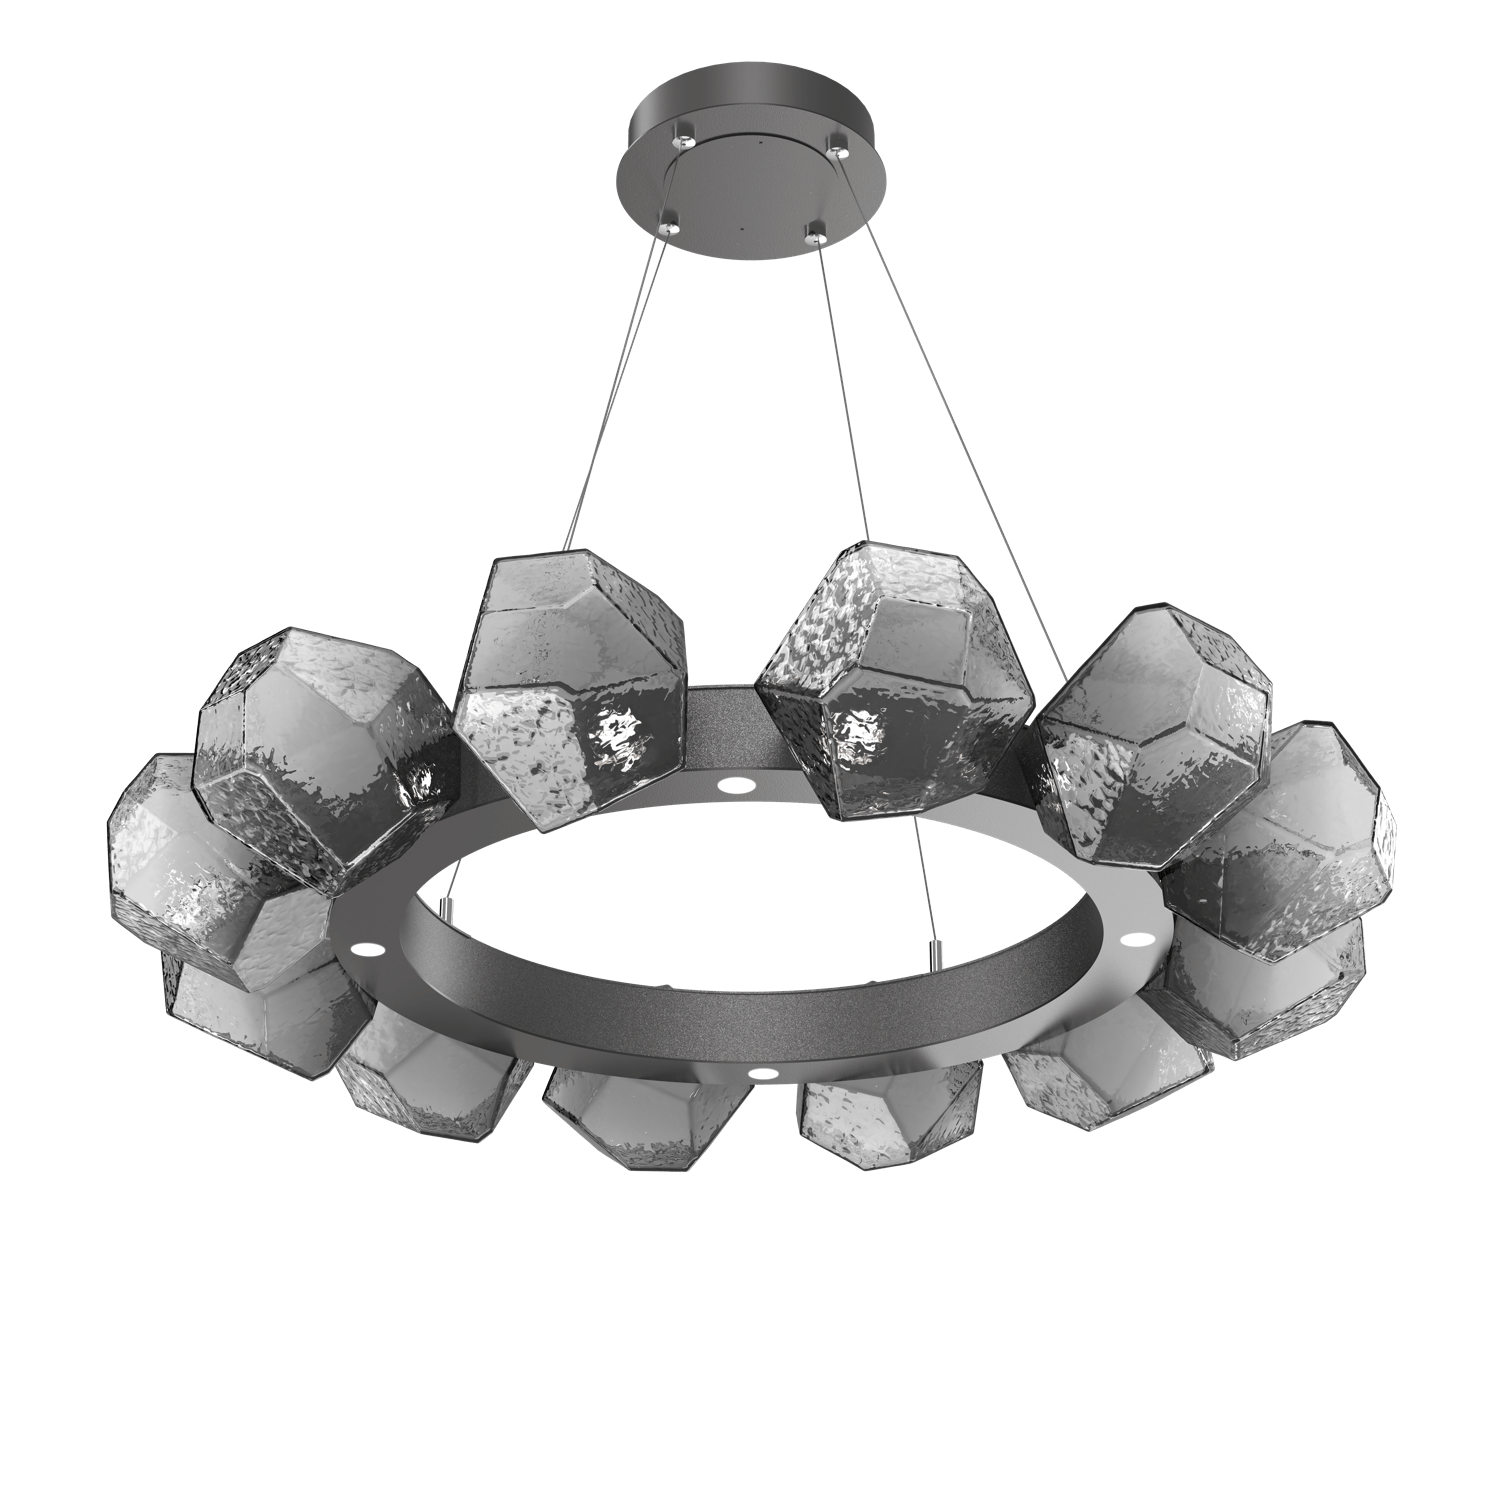 CHB0039-36-GP-S-Hammerton-Studio-Gem-36-inch-radial-ring-chandelier-with-graphite-finish-and-smoke-blown-glass-shades-and-LED-lamping